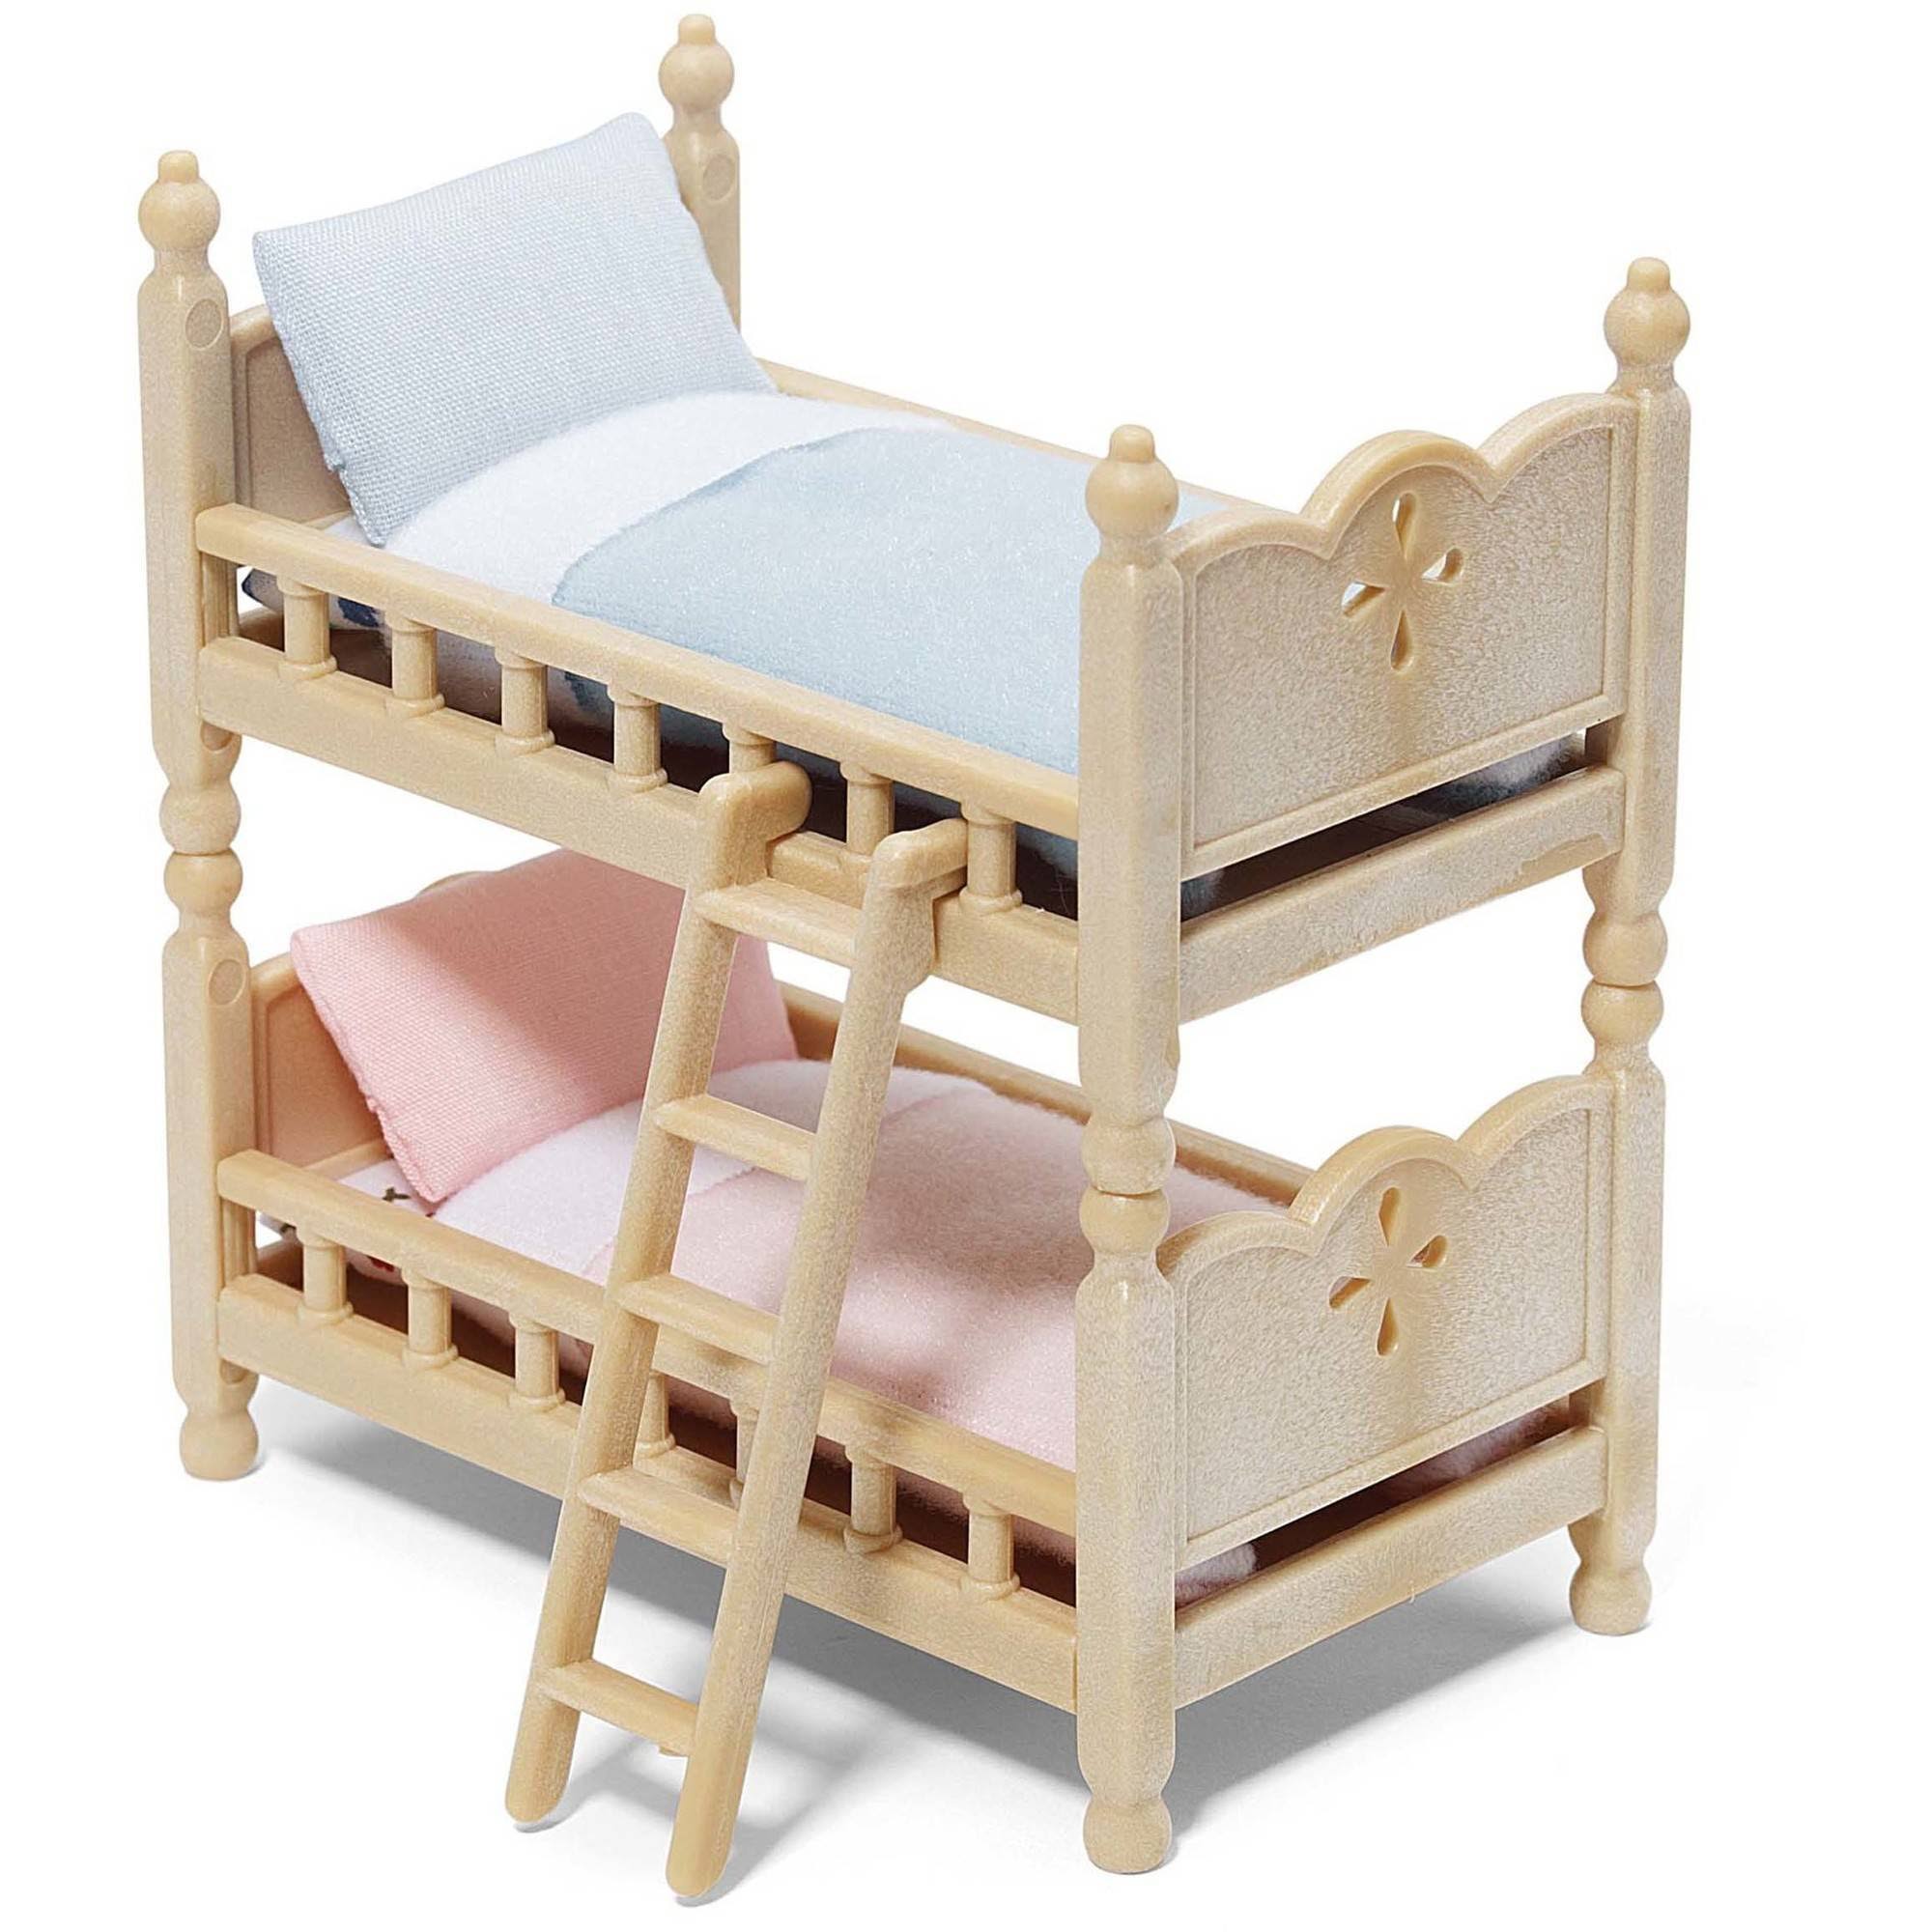 Calico Critters Bunk Beds Toy